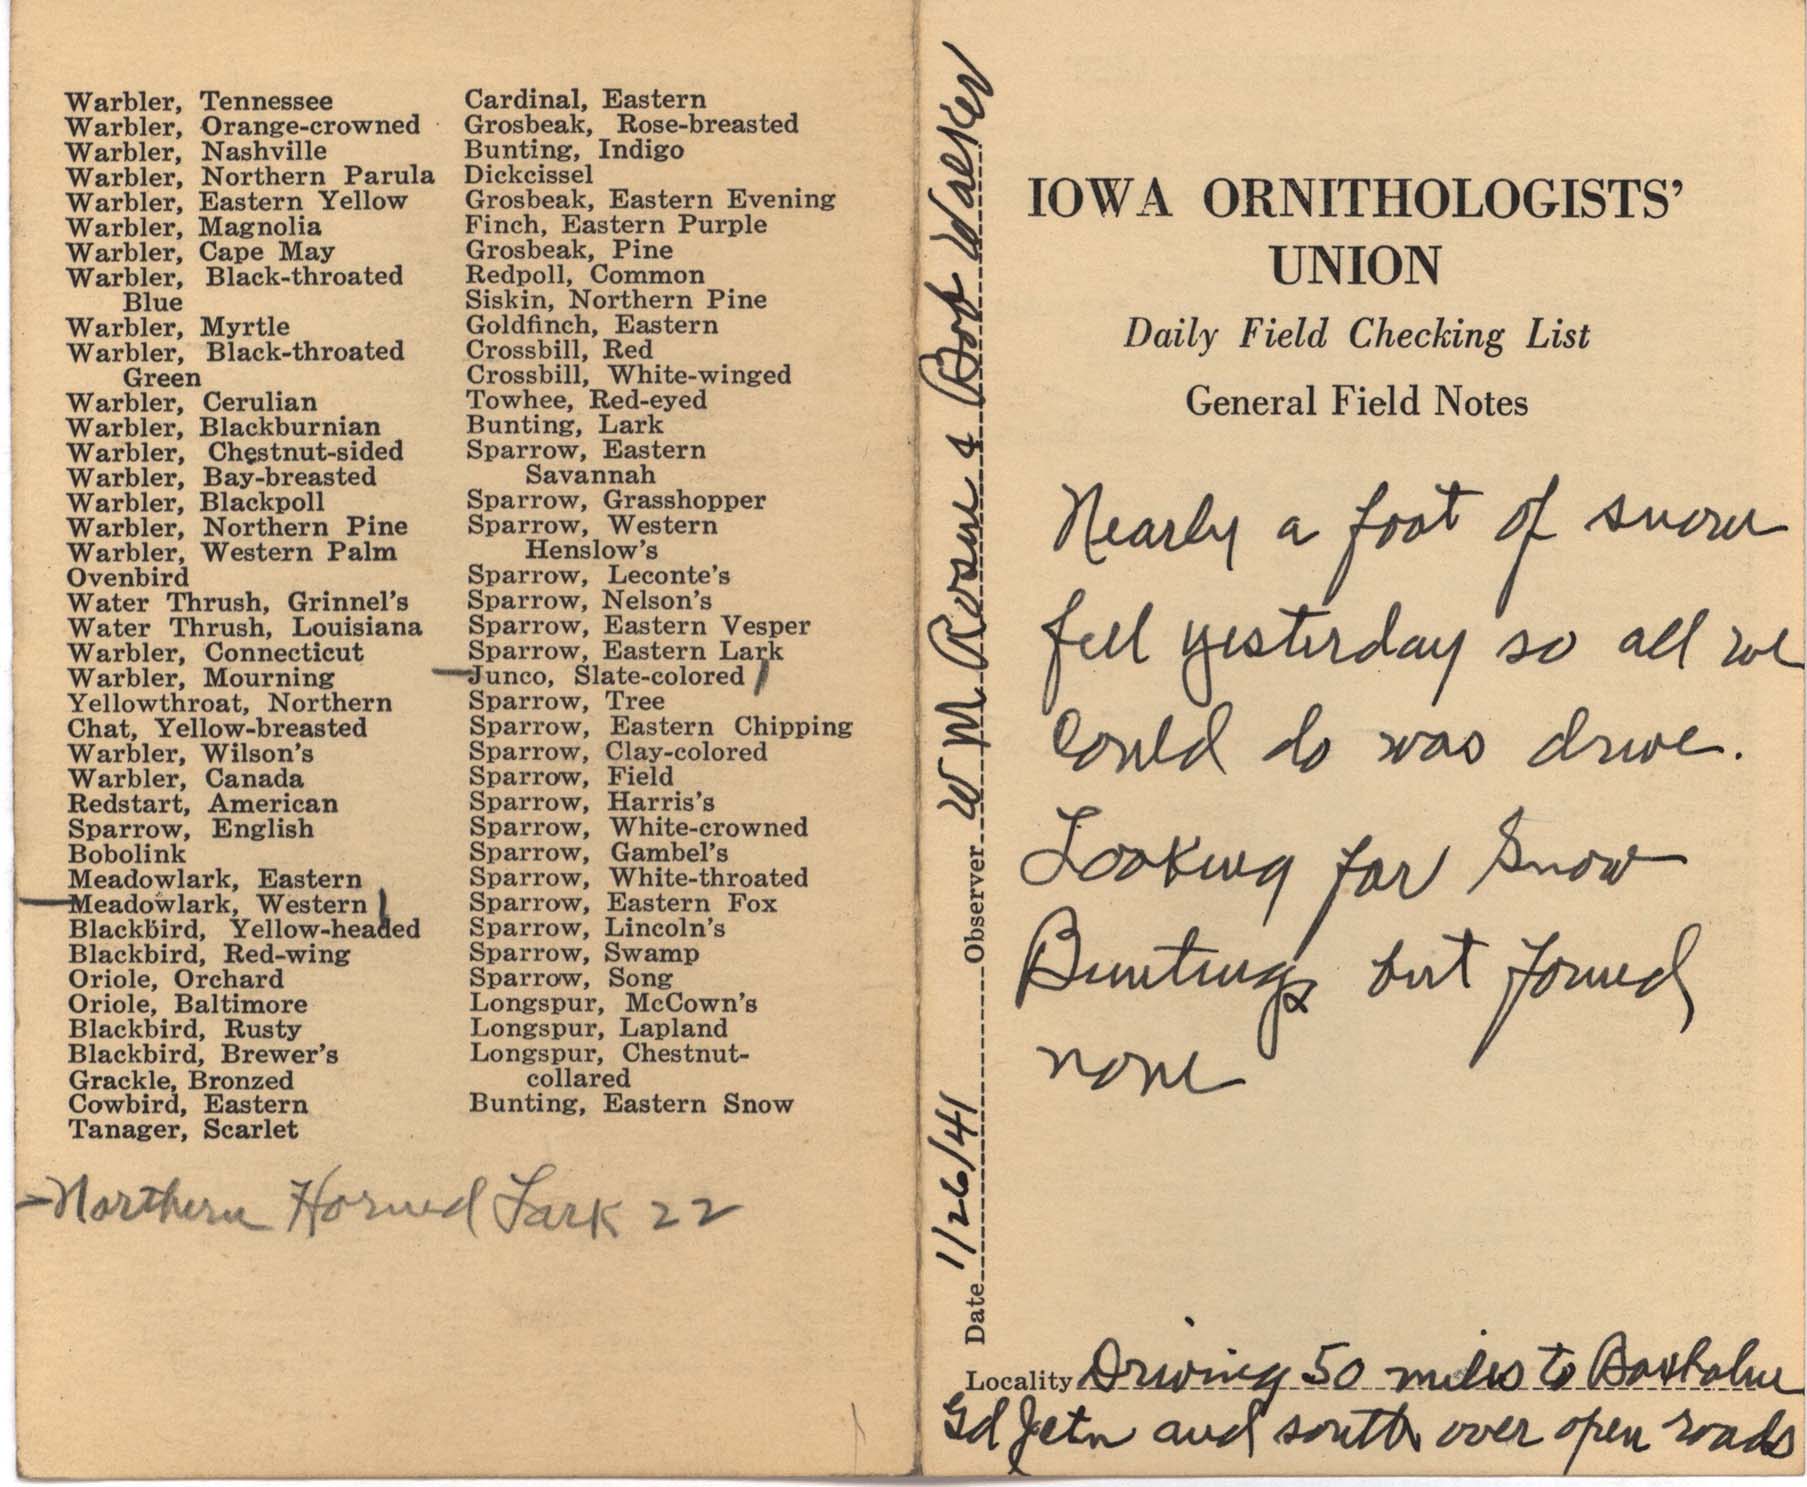 Daily field checking list by Walter Rosene, January 26, 1941